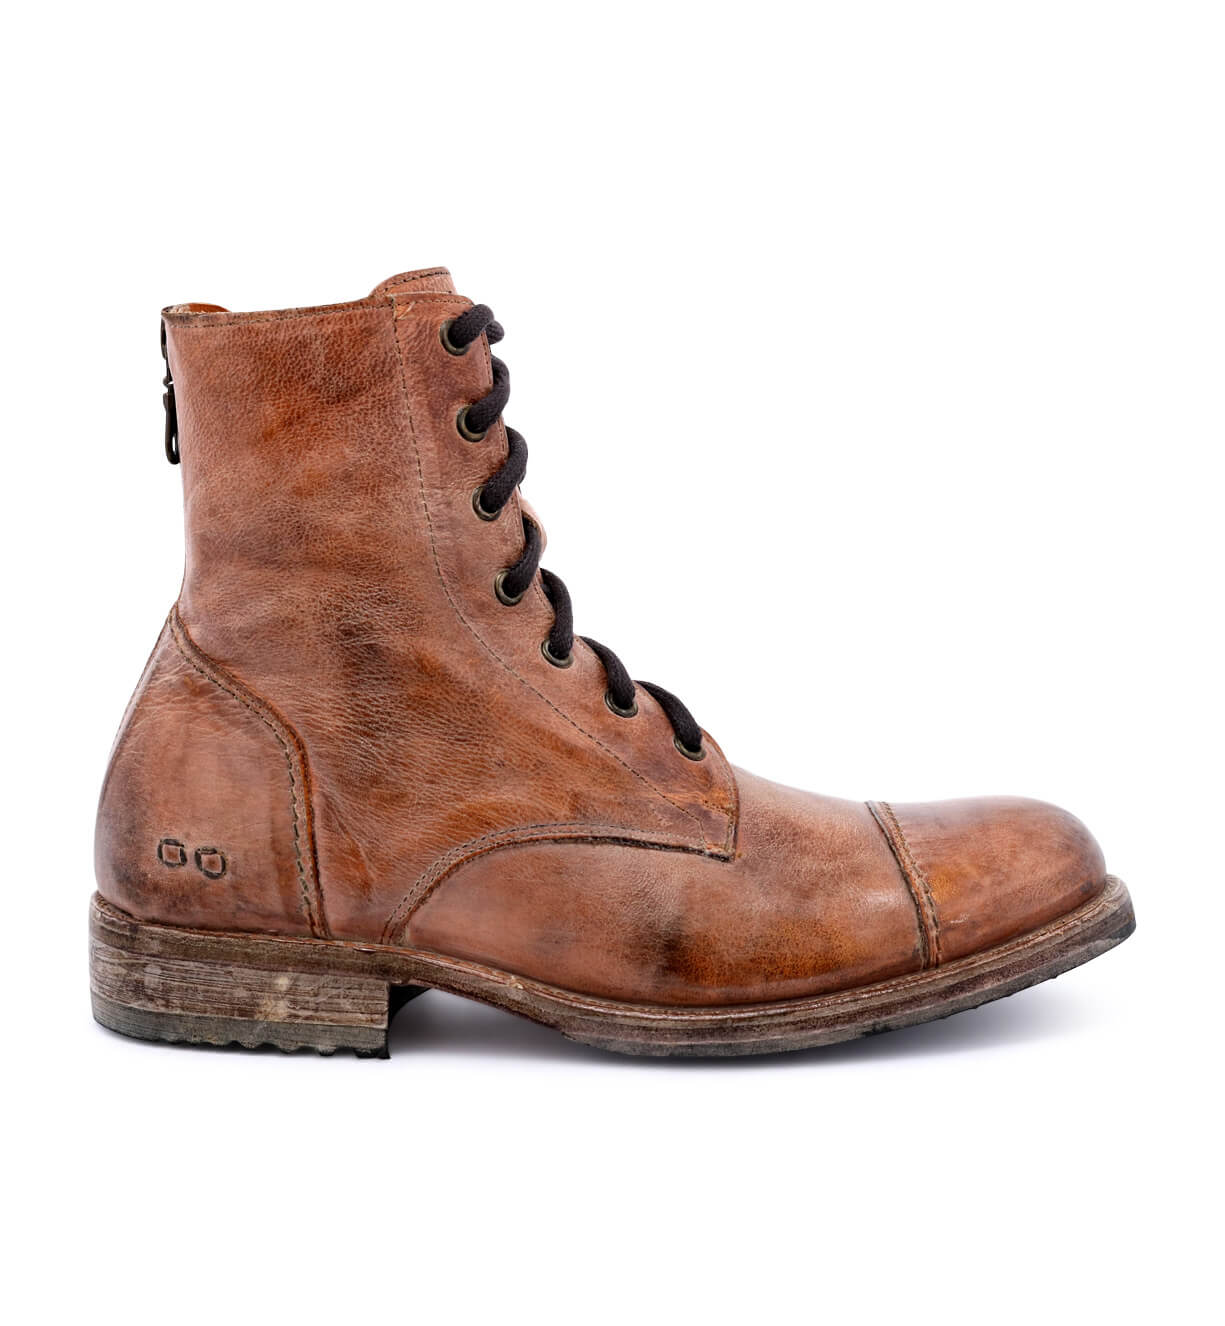 A men's Brown Leather Boot with laces called Protege from the brand Bed Stu.